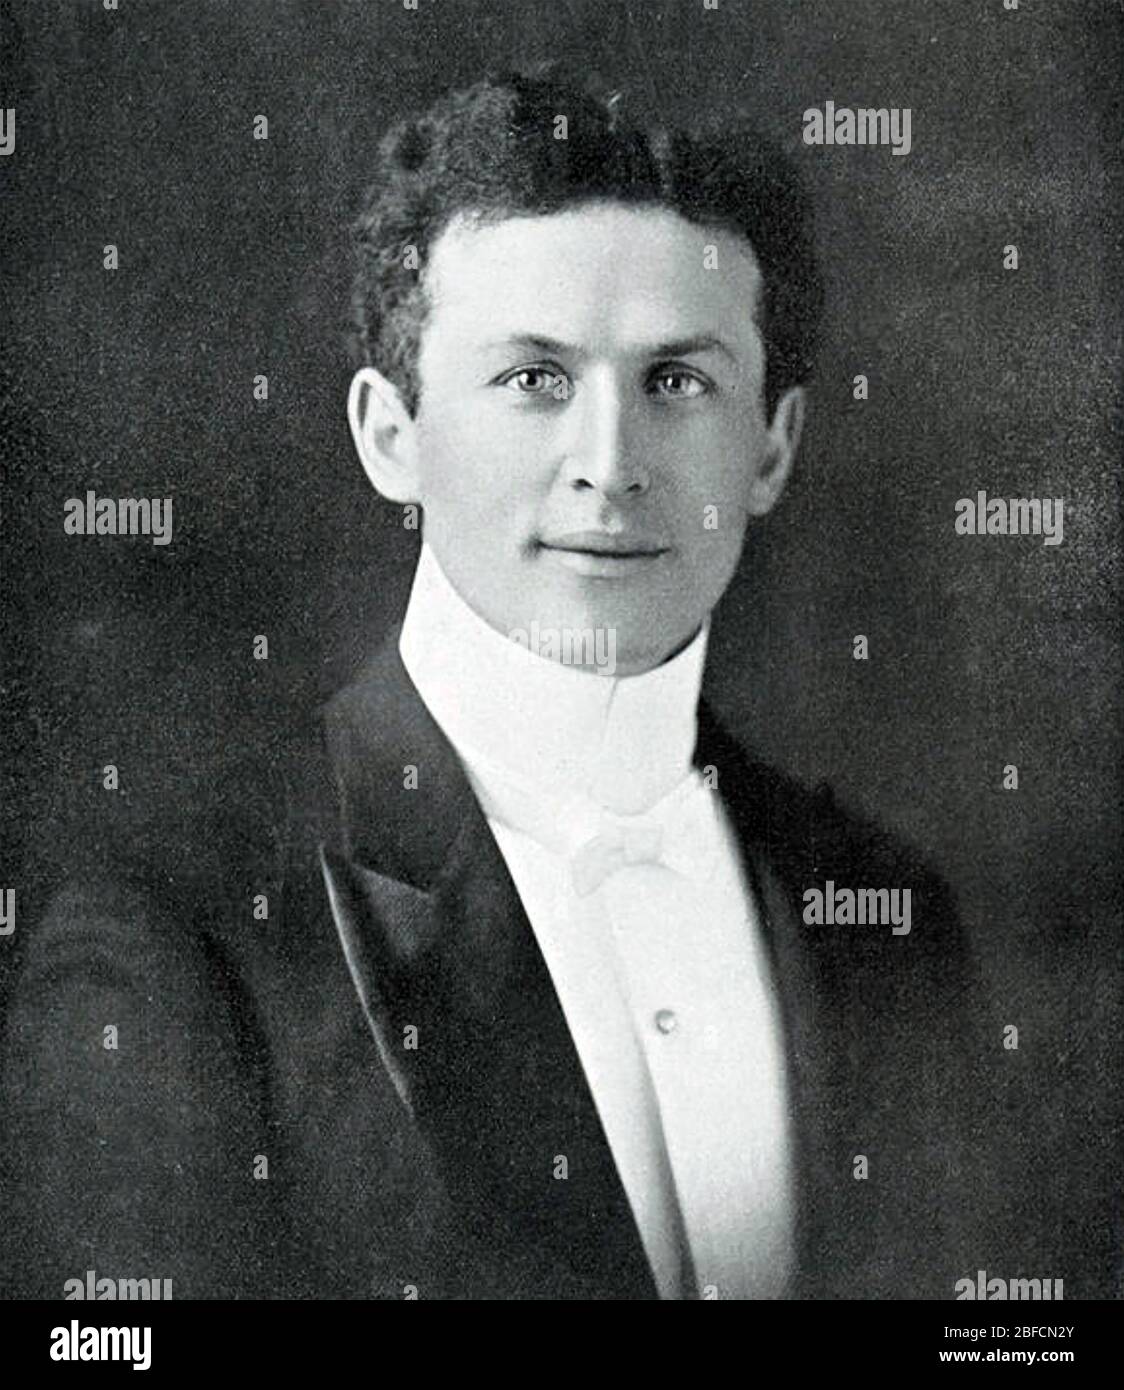 HARRY HOUDINI (1874-1926) Hungarian-American illusionist and stunt performer about 1900 Stock Photo